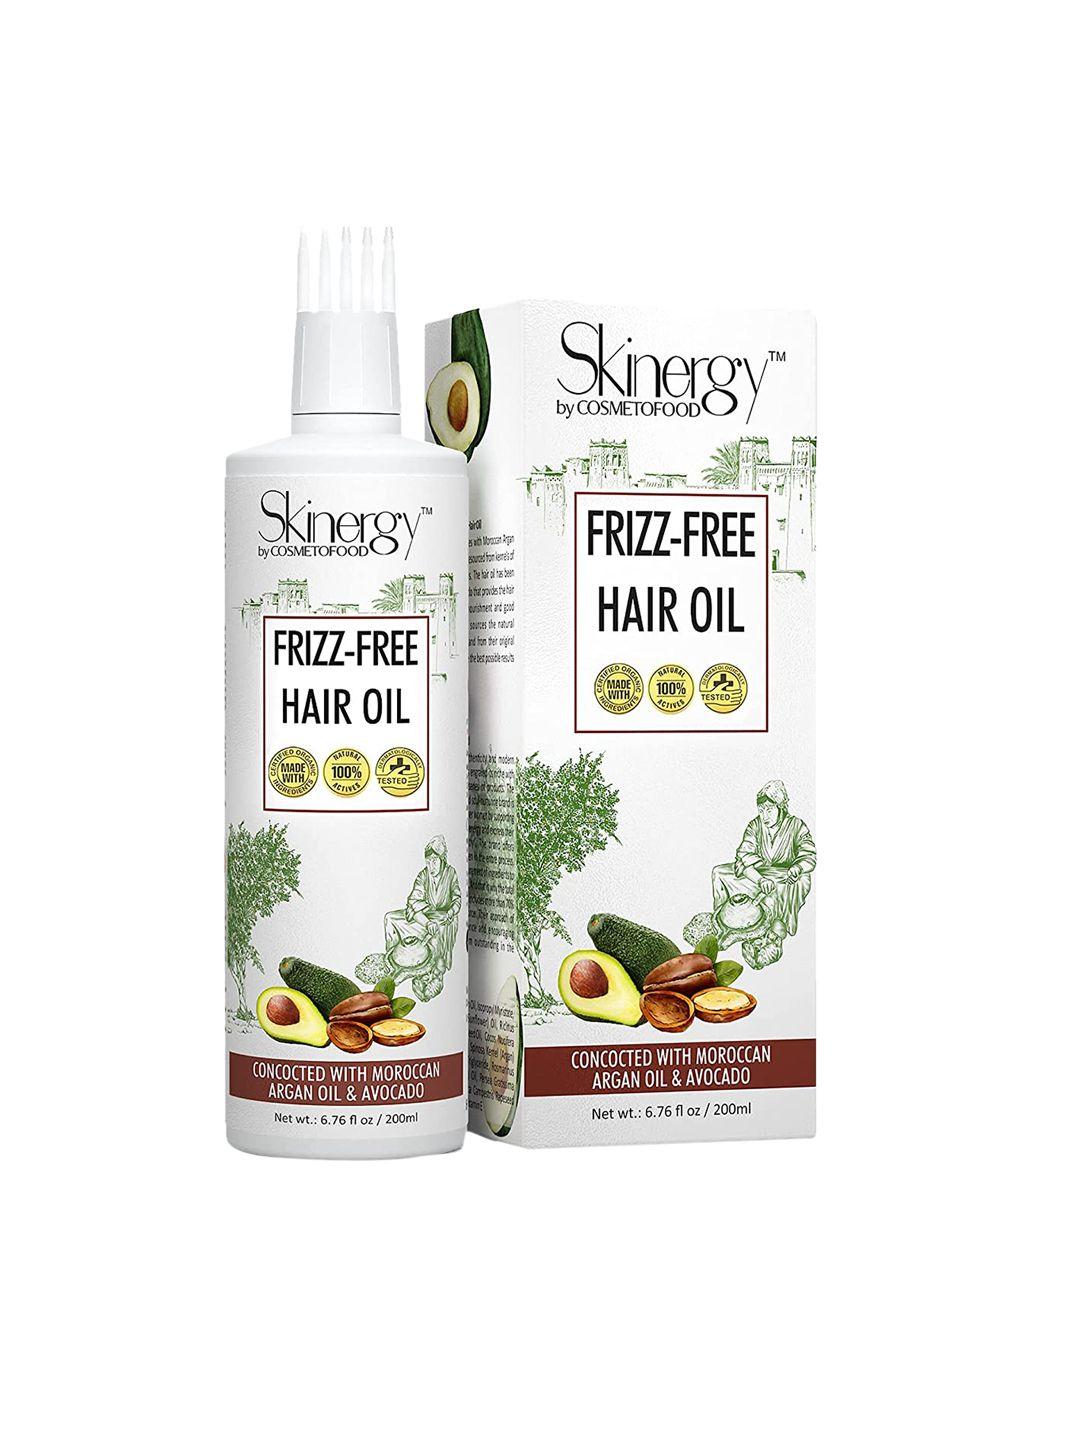 cosmetofood skinergy frizz-free hair oil with moroccan argan oil & avocado 200 ml